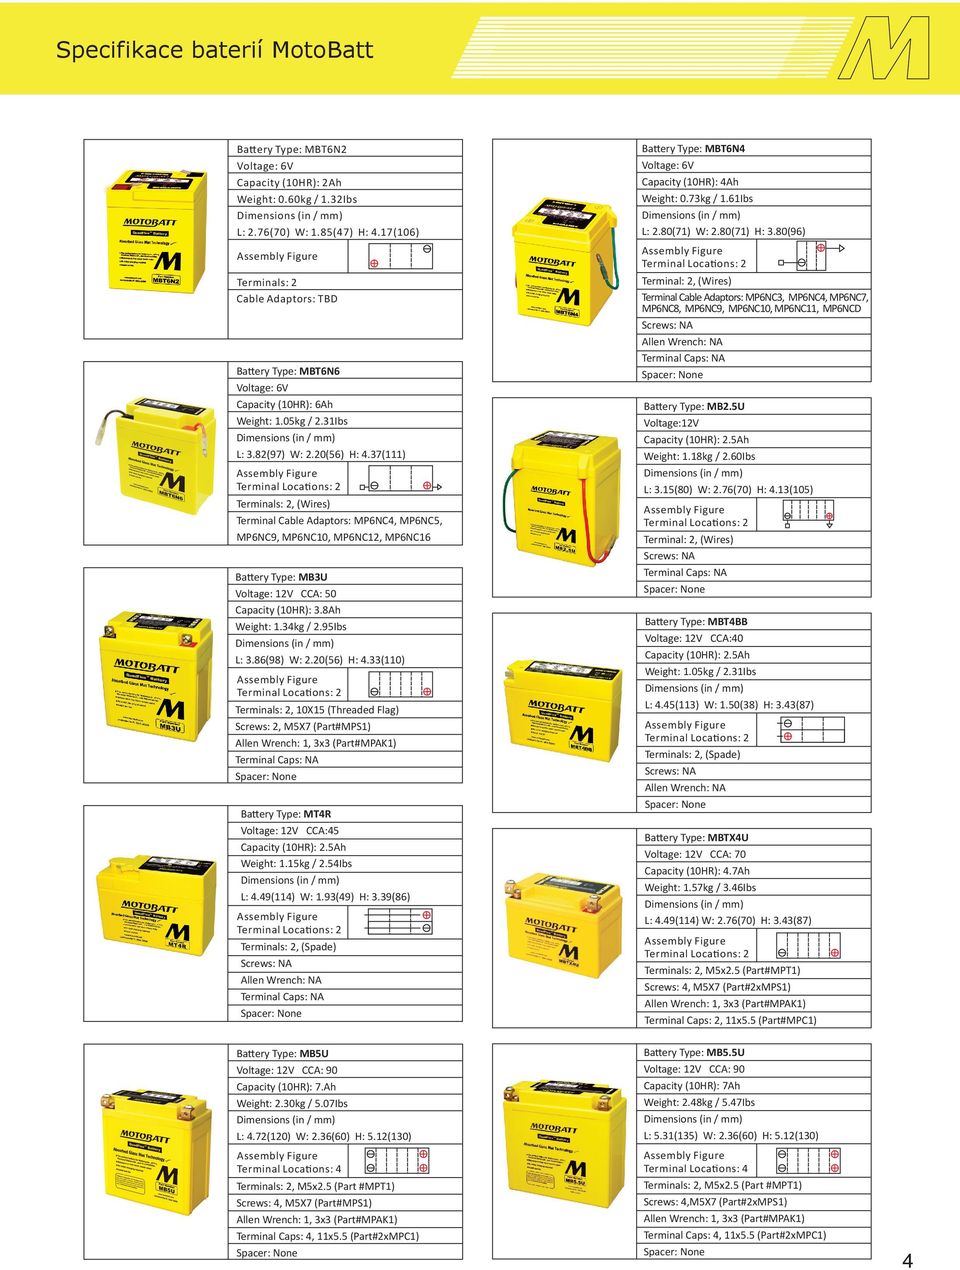 37(111) Terminal Locations: 2 Terminals: 2, (Wires) Terminal Cable Adaptors: MP6NC4, MP6NC5, MP6NC9, MP6NC10, MP6NC12, MP6NC16 Battery Type: MB3U Voltage: 12V CCA: 50 Capacity (10HR): 3.8Ah Weight: 1.